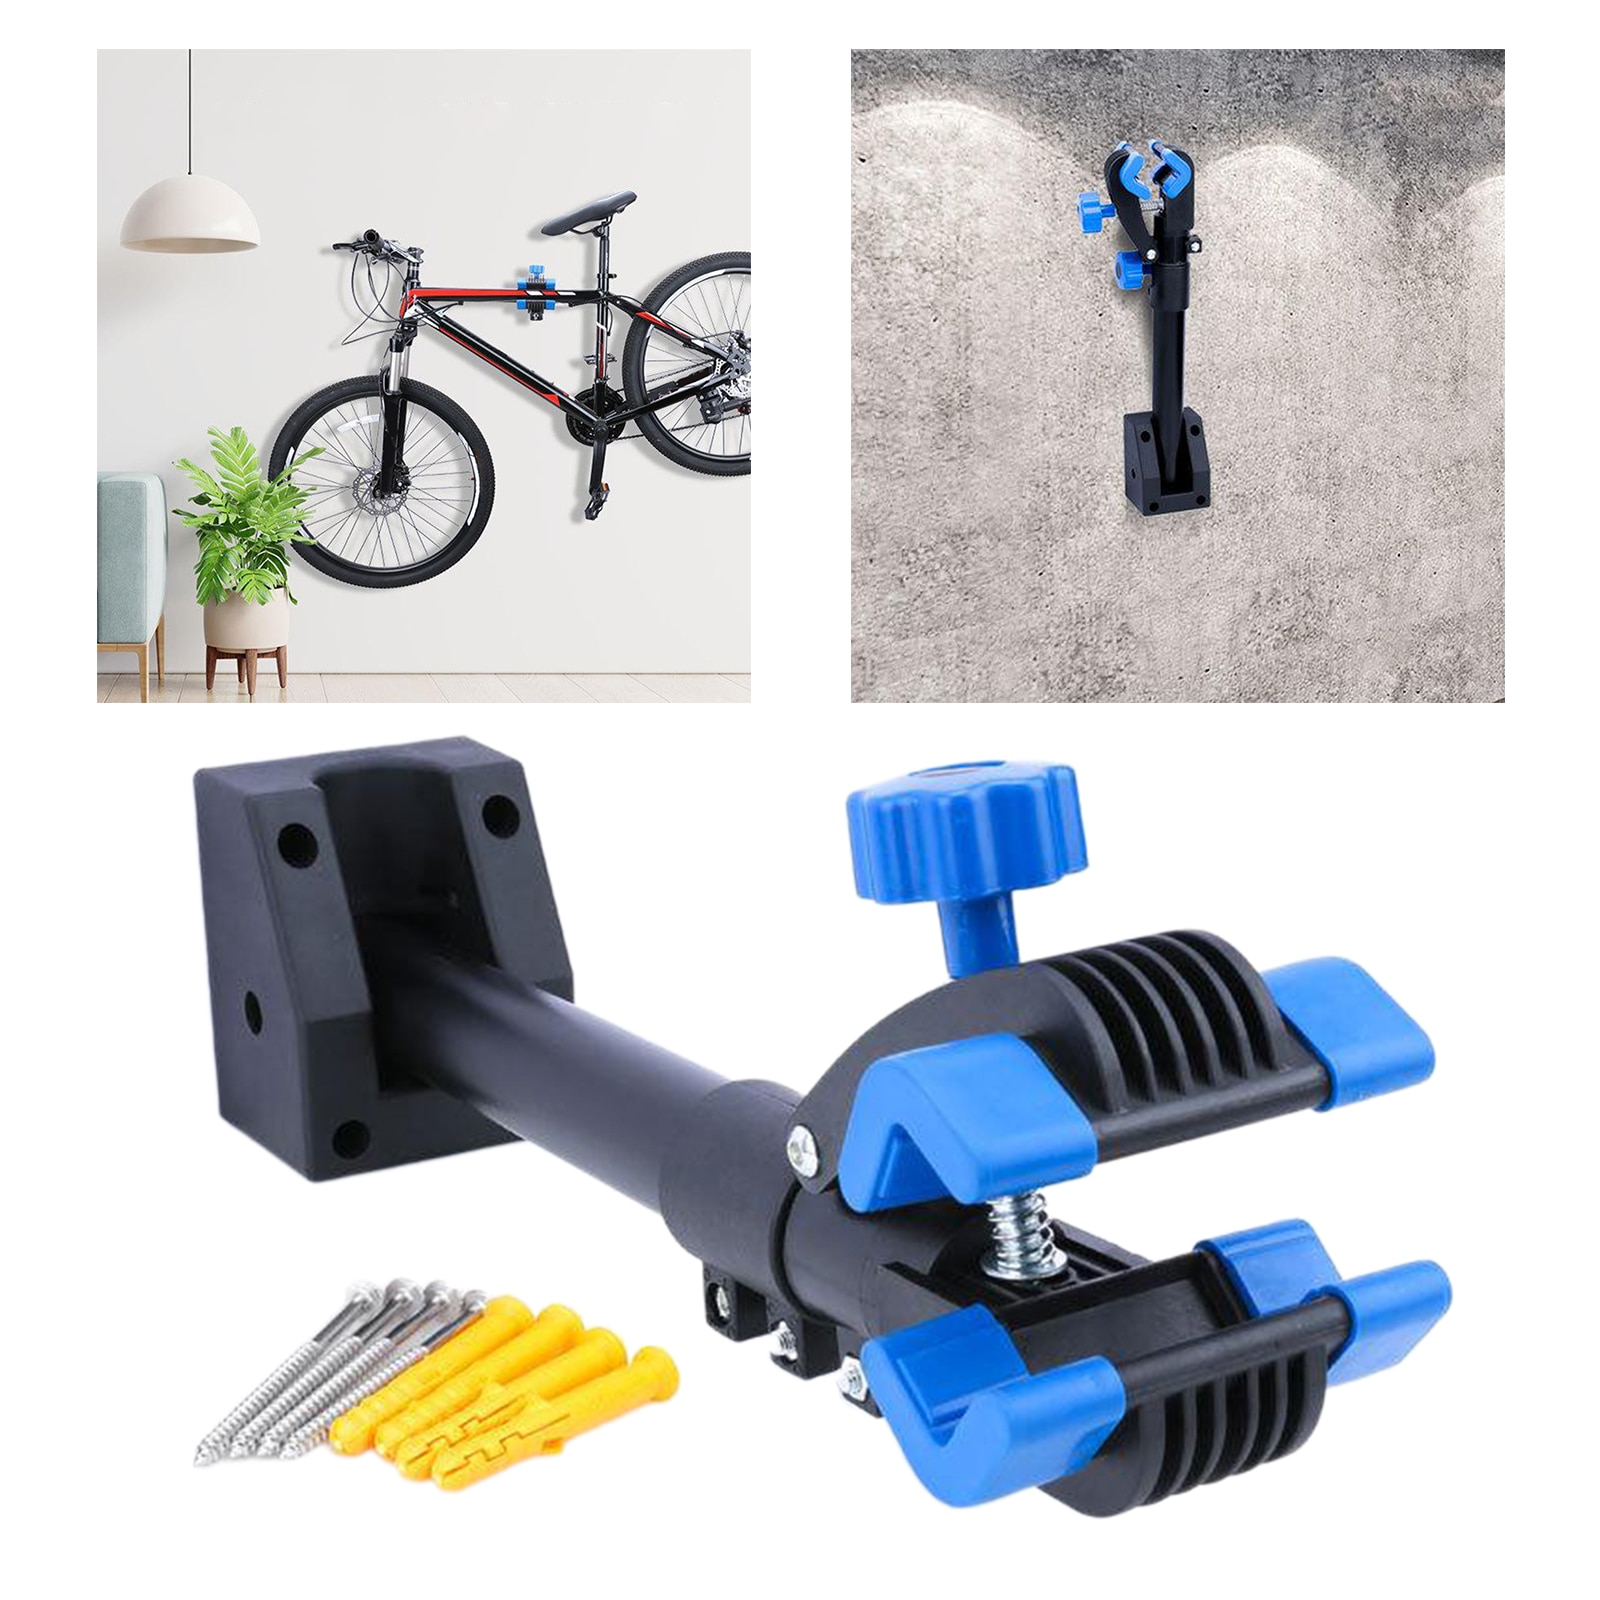 Deluxe Bike Wall-Mount Repair Stand Clamp Bicycle Home Garage Wall Mounted Hanger Storage Hook- Rotatable, Folding